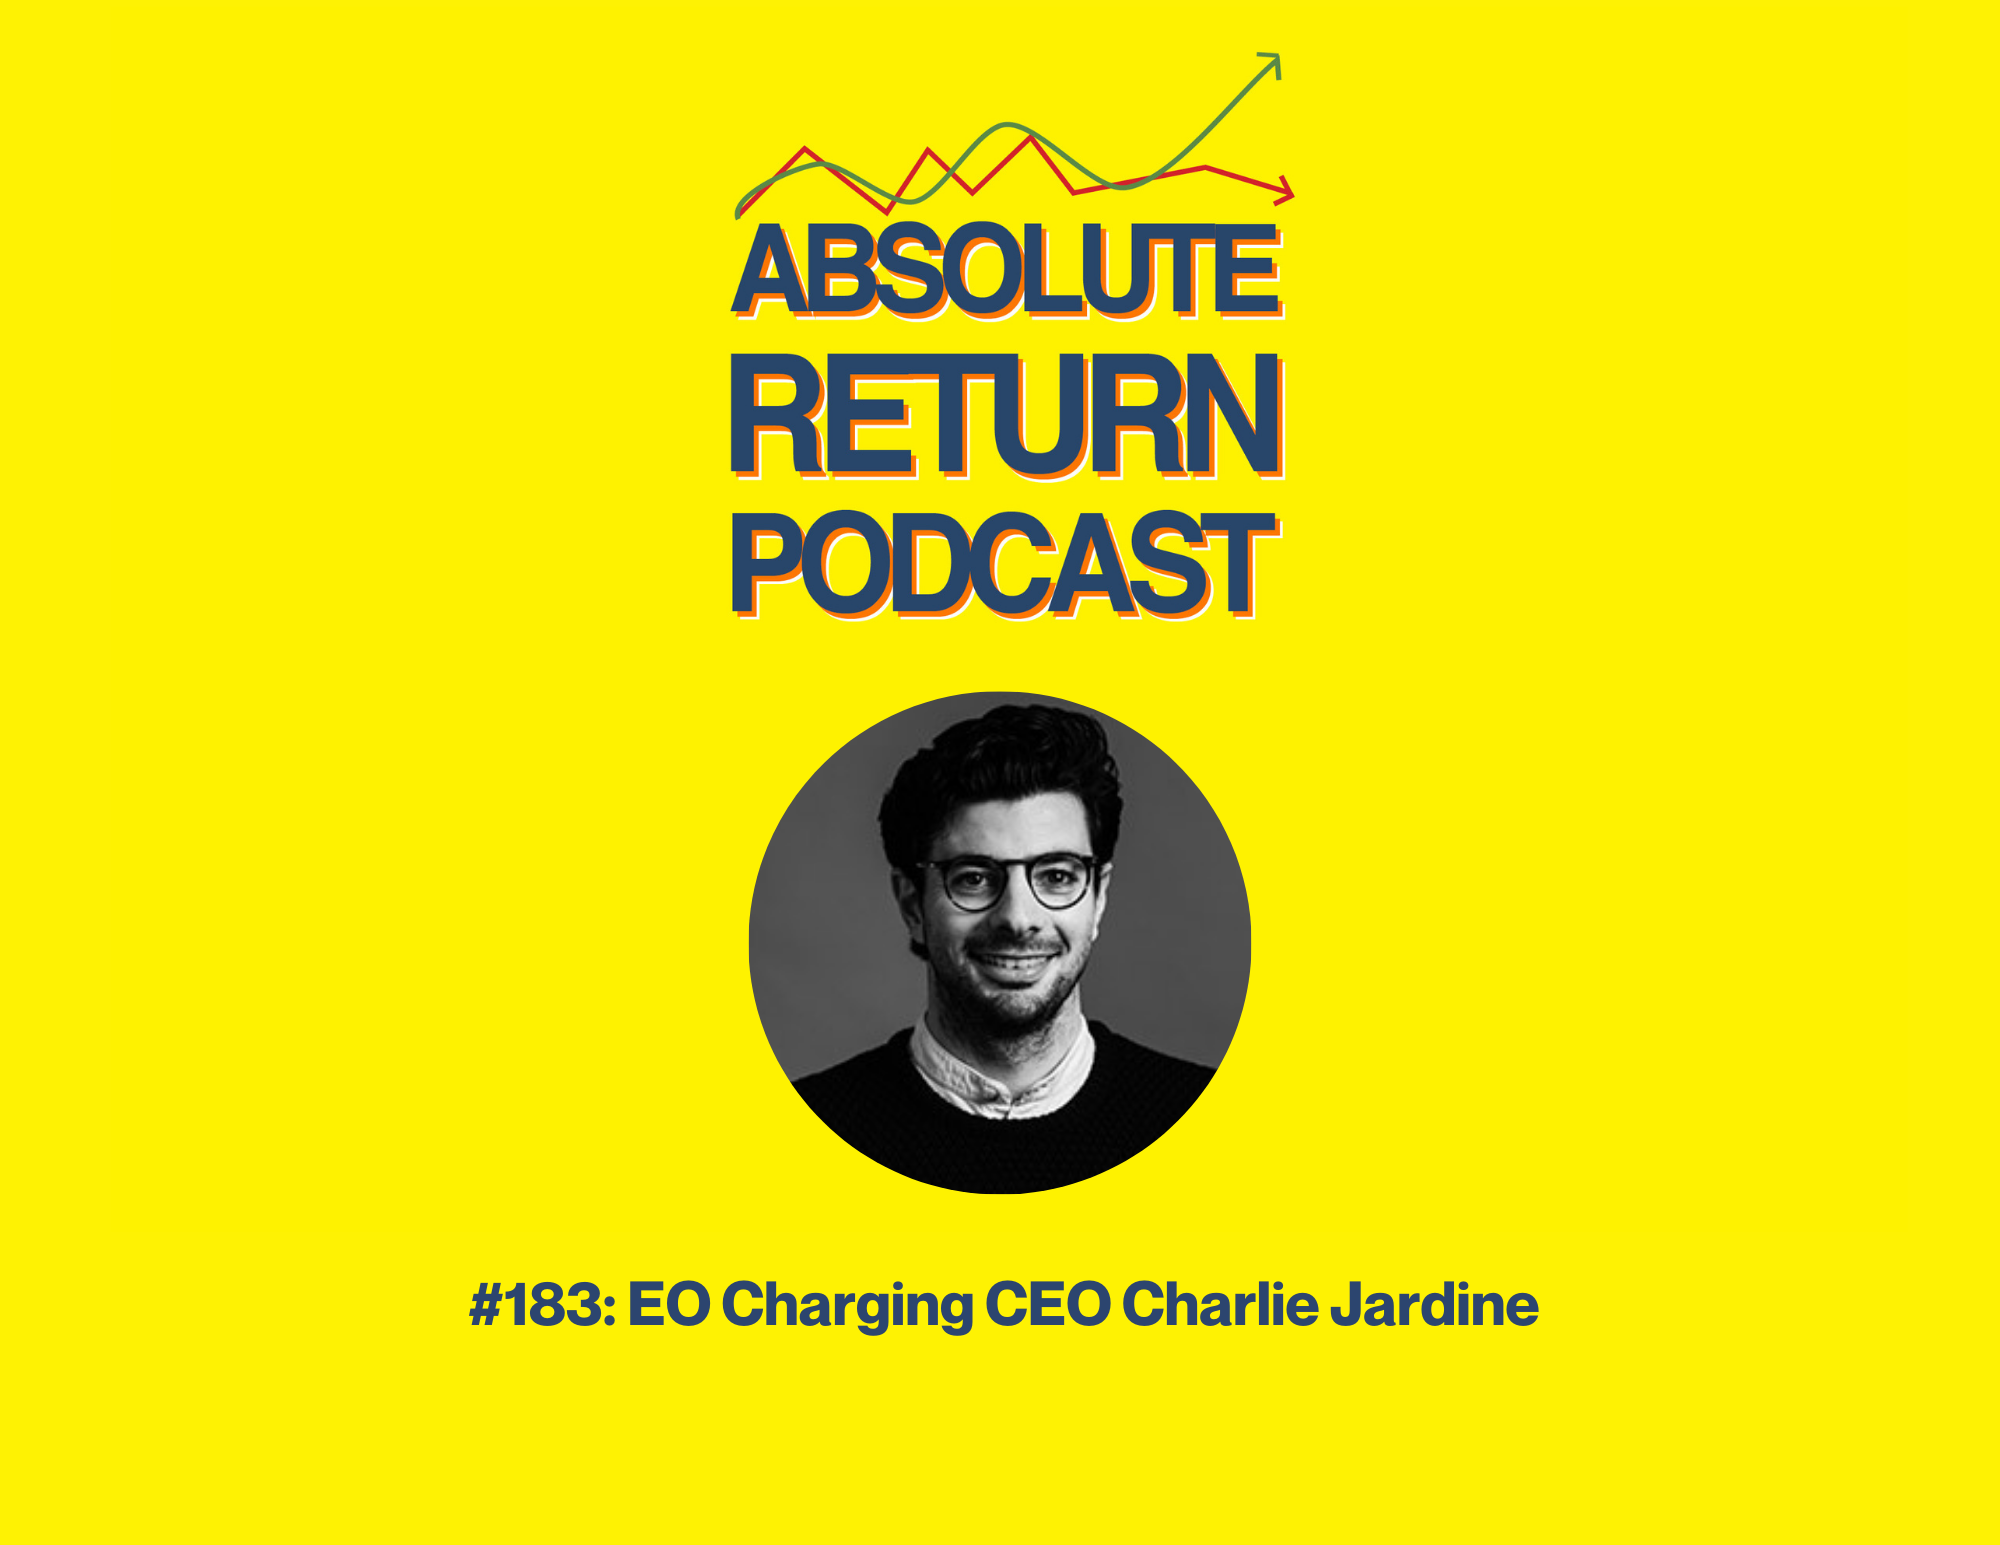 Absolute Return Podcast #183: Leadership Chat: EO Charging CEO Charlie Jardine